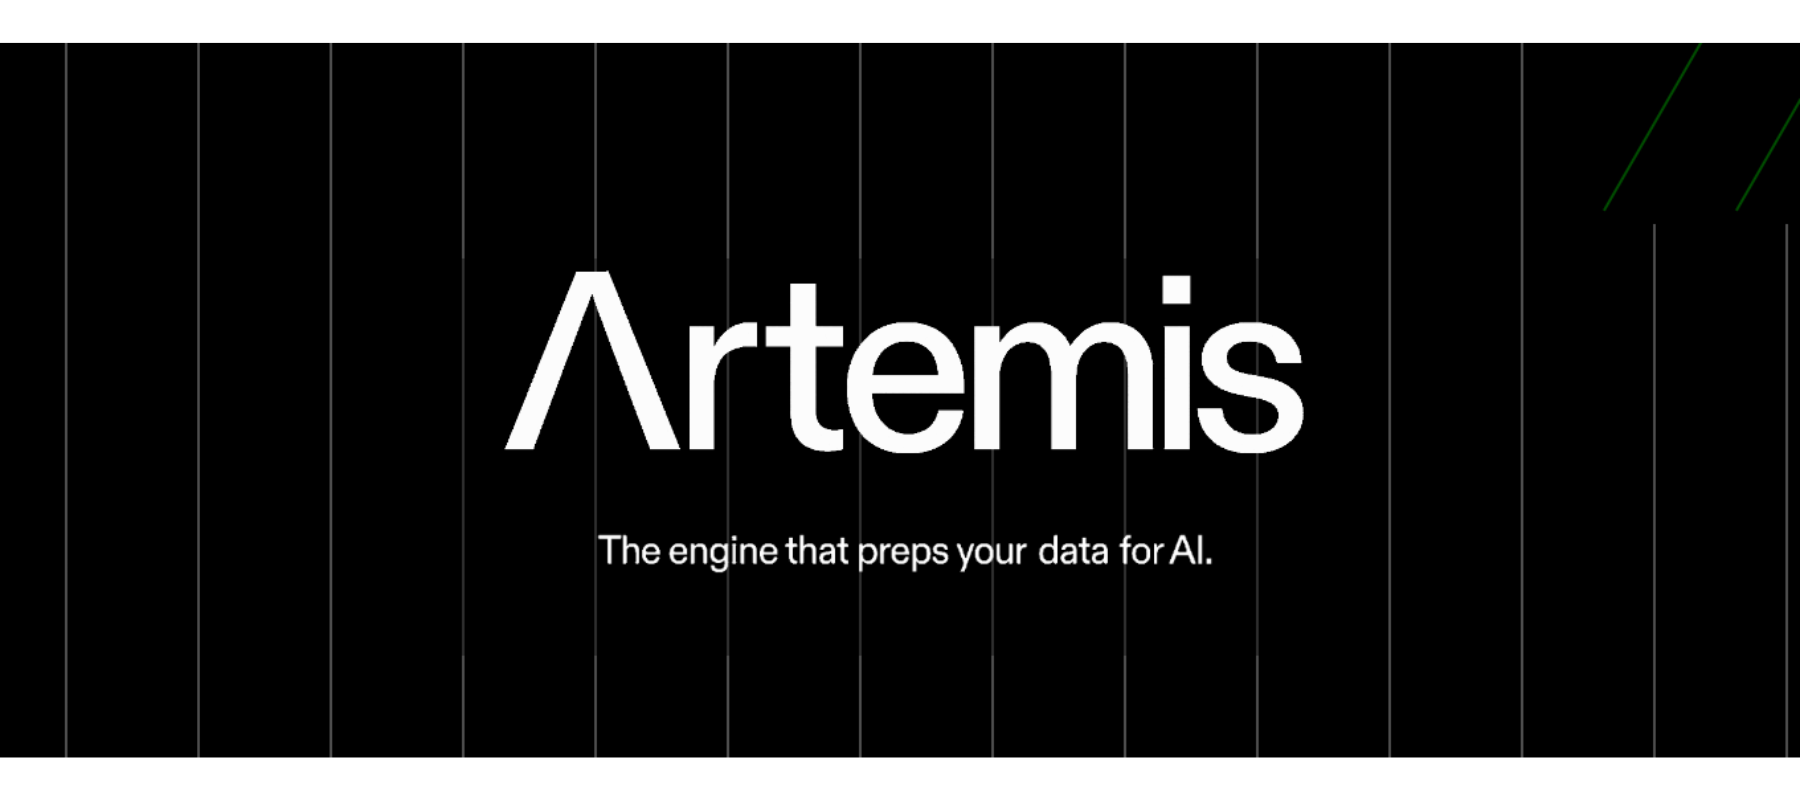 Canadian tech startup Artemis raises $1.5m pre-seed funding to automate data cleaning for analytics and AI